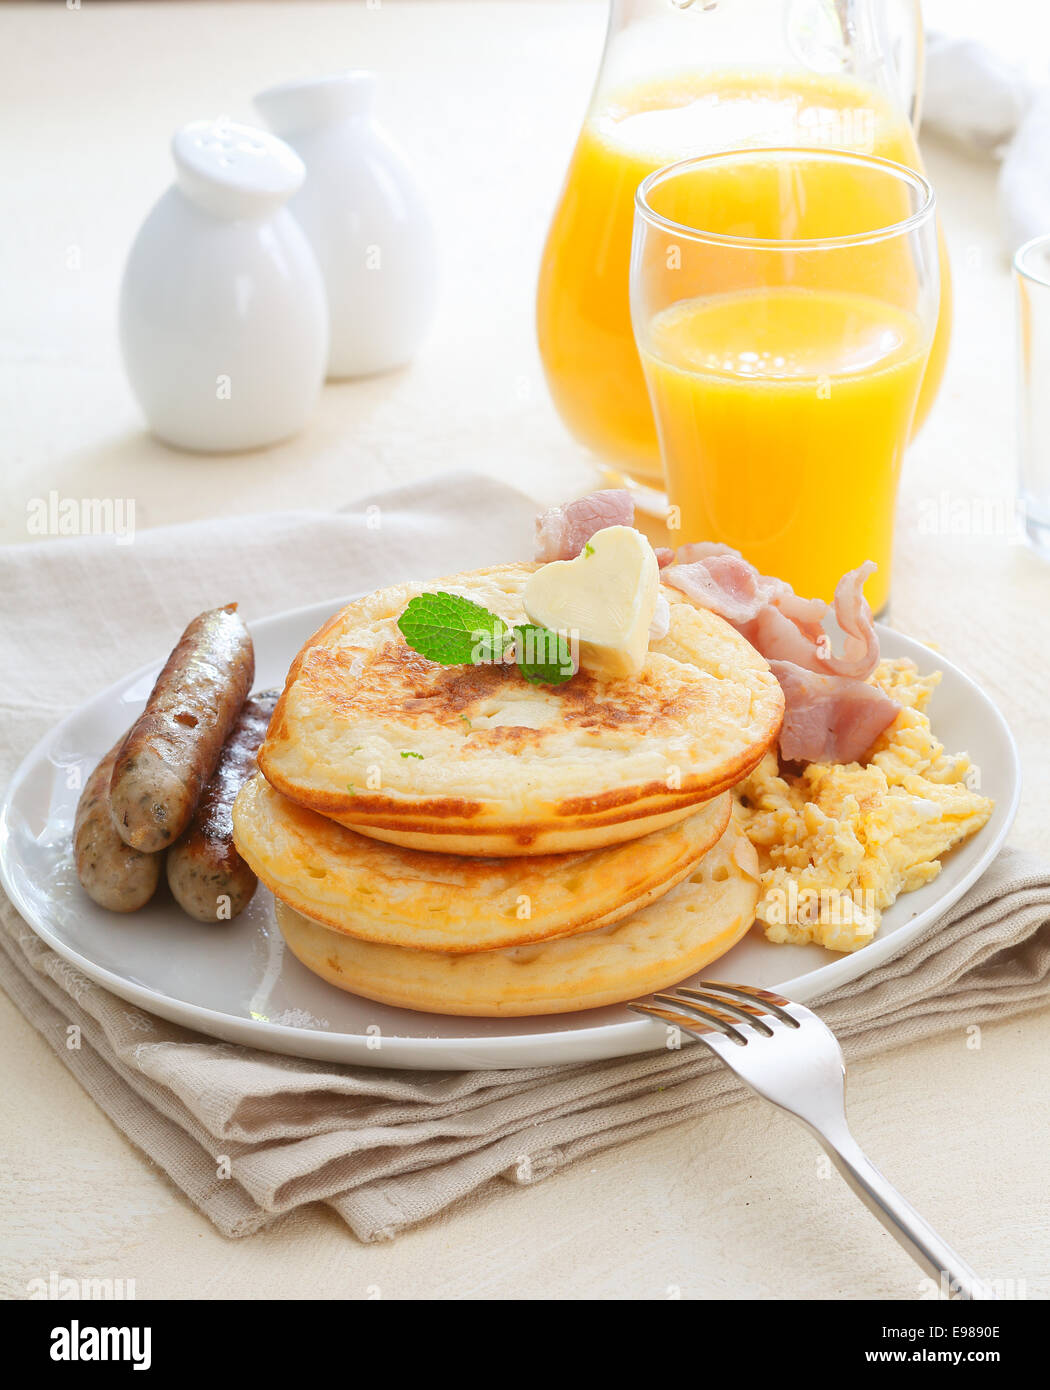 Pancakes And Bacon And Orange Juice